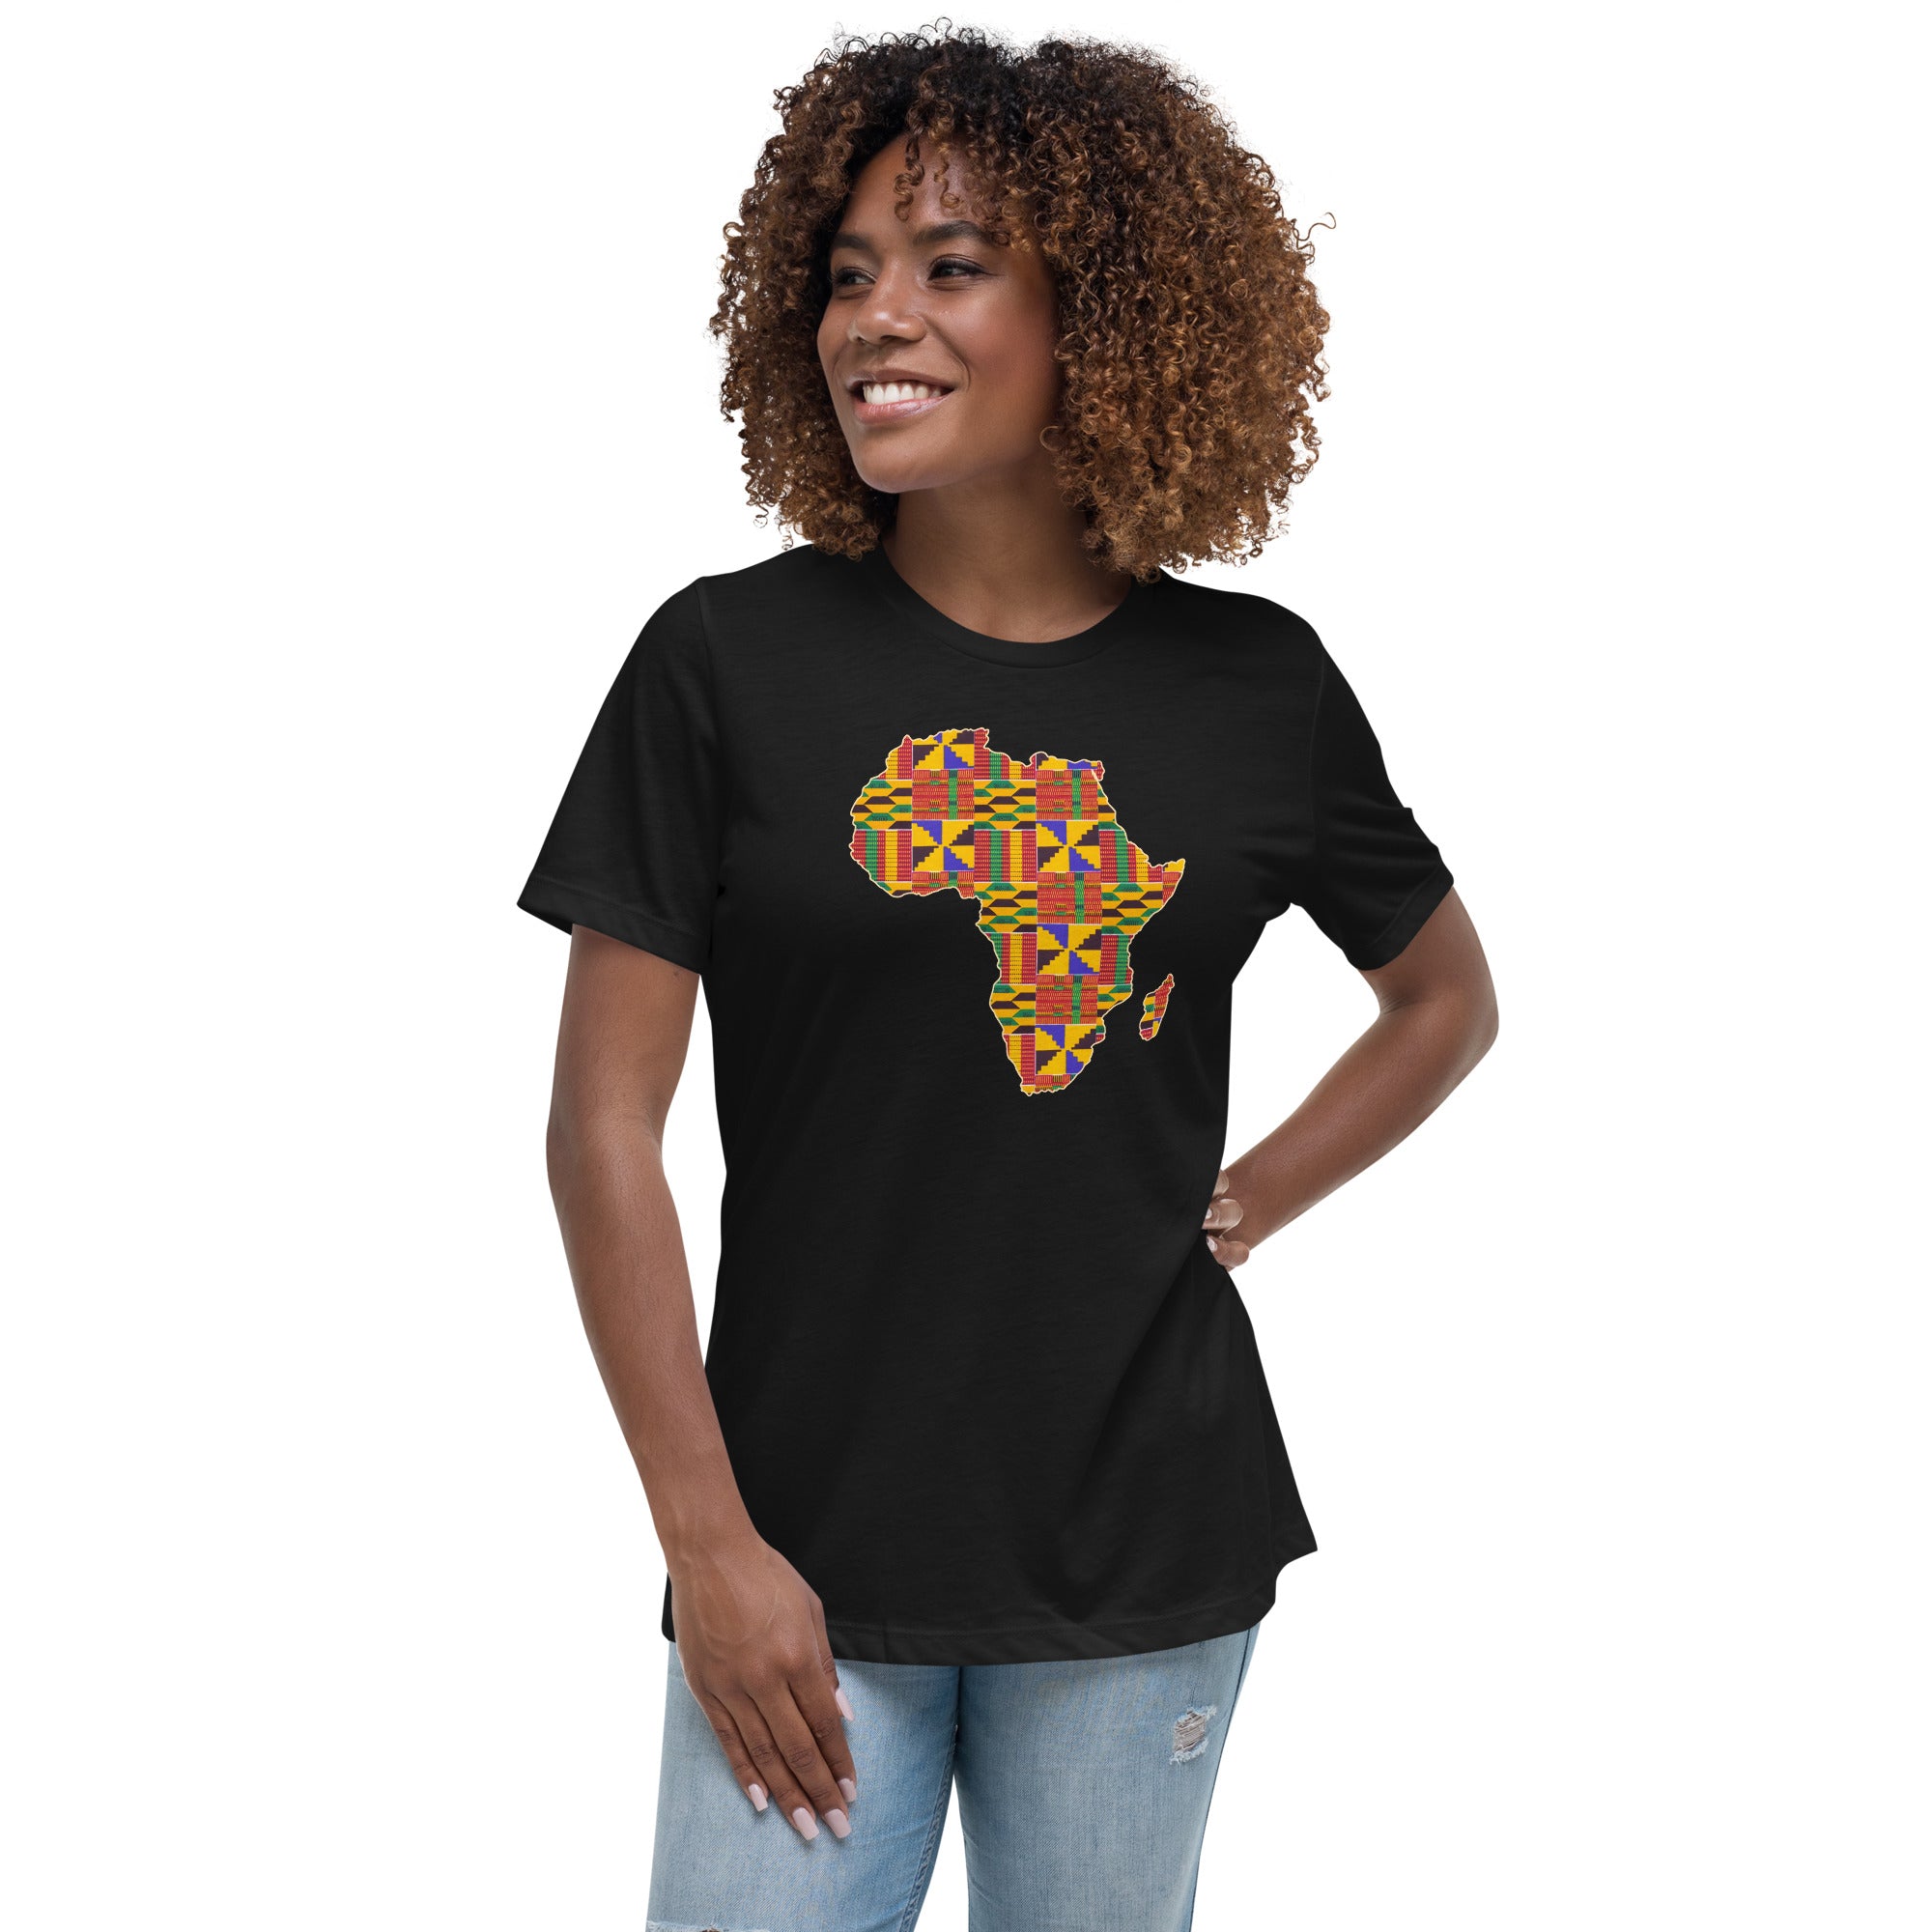 T-shirt Women's - African continent in kente print D001 (Shirt in Black or White)